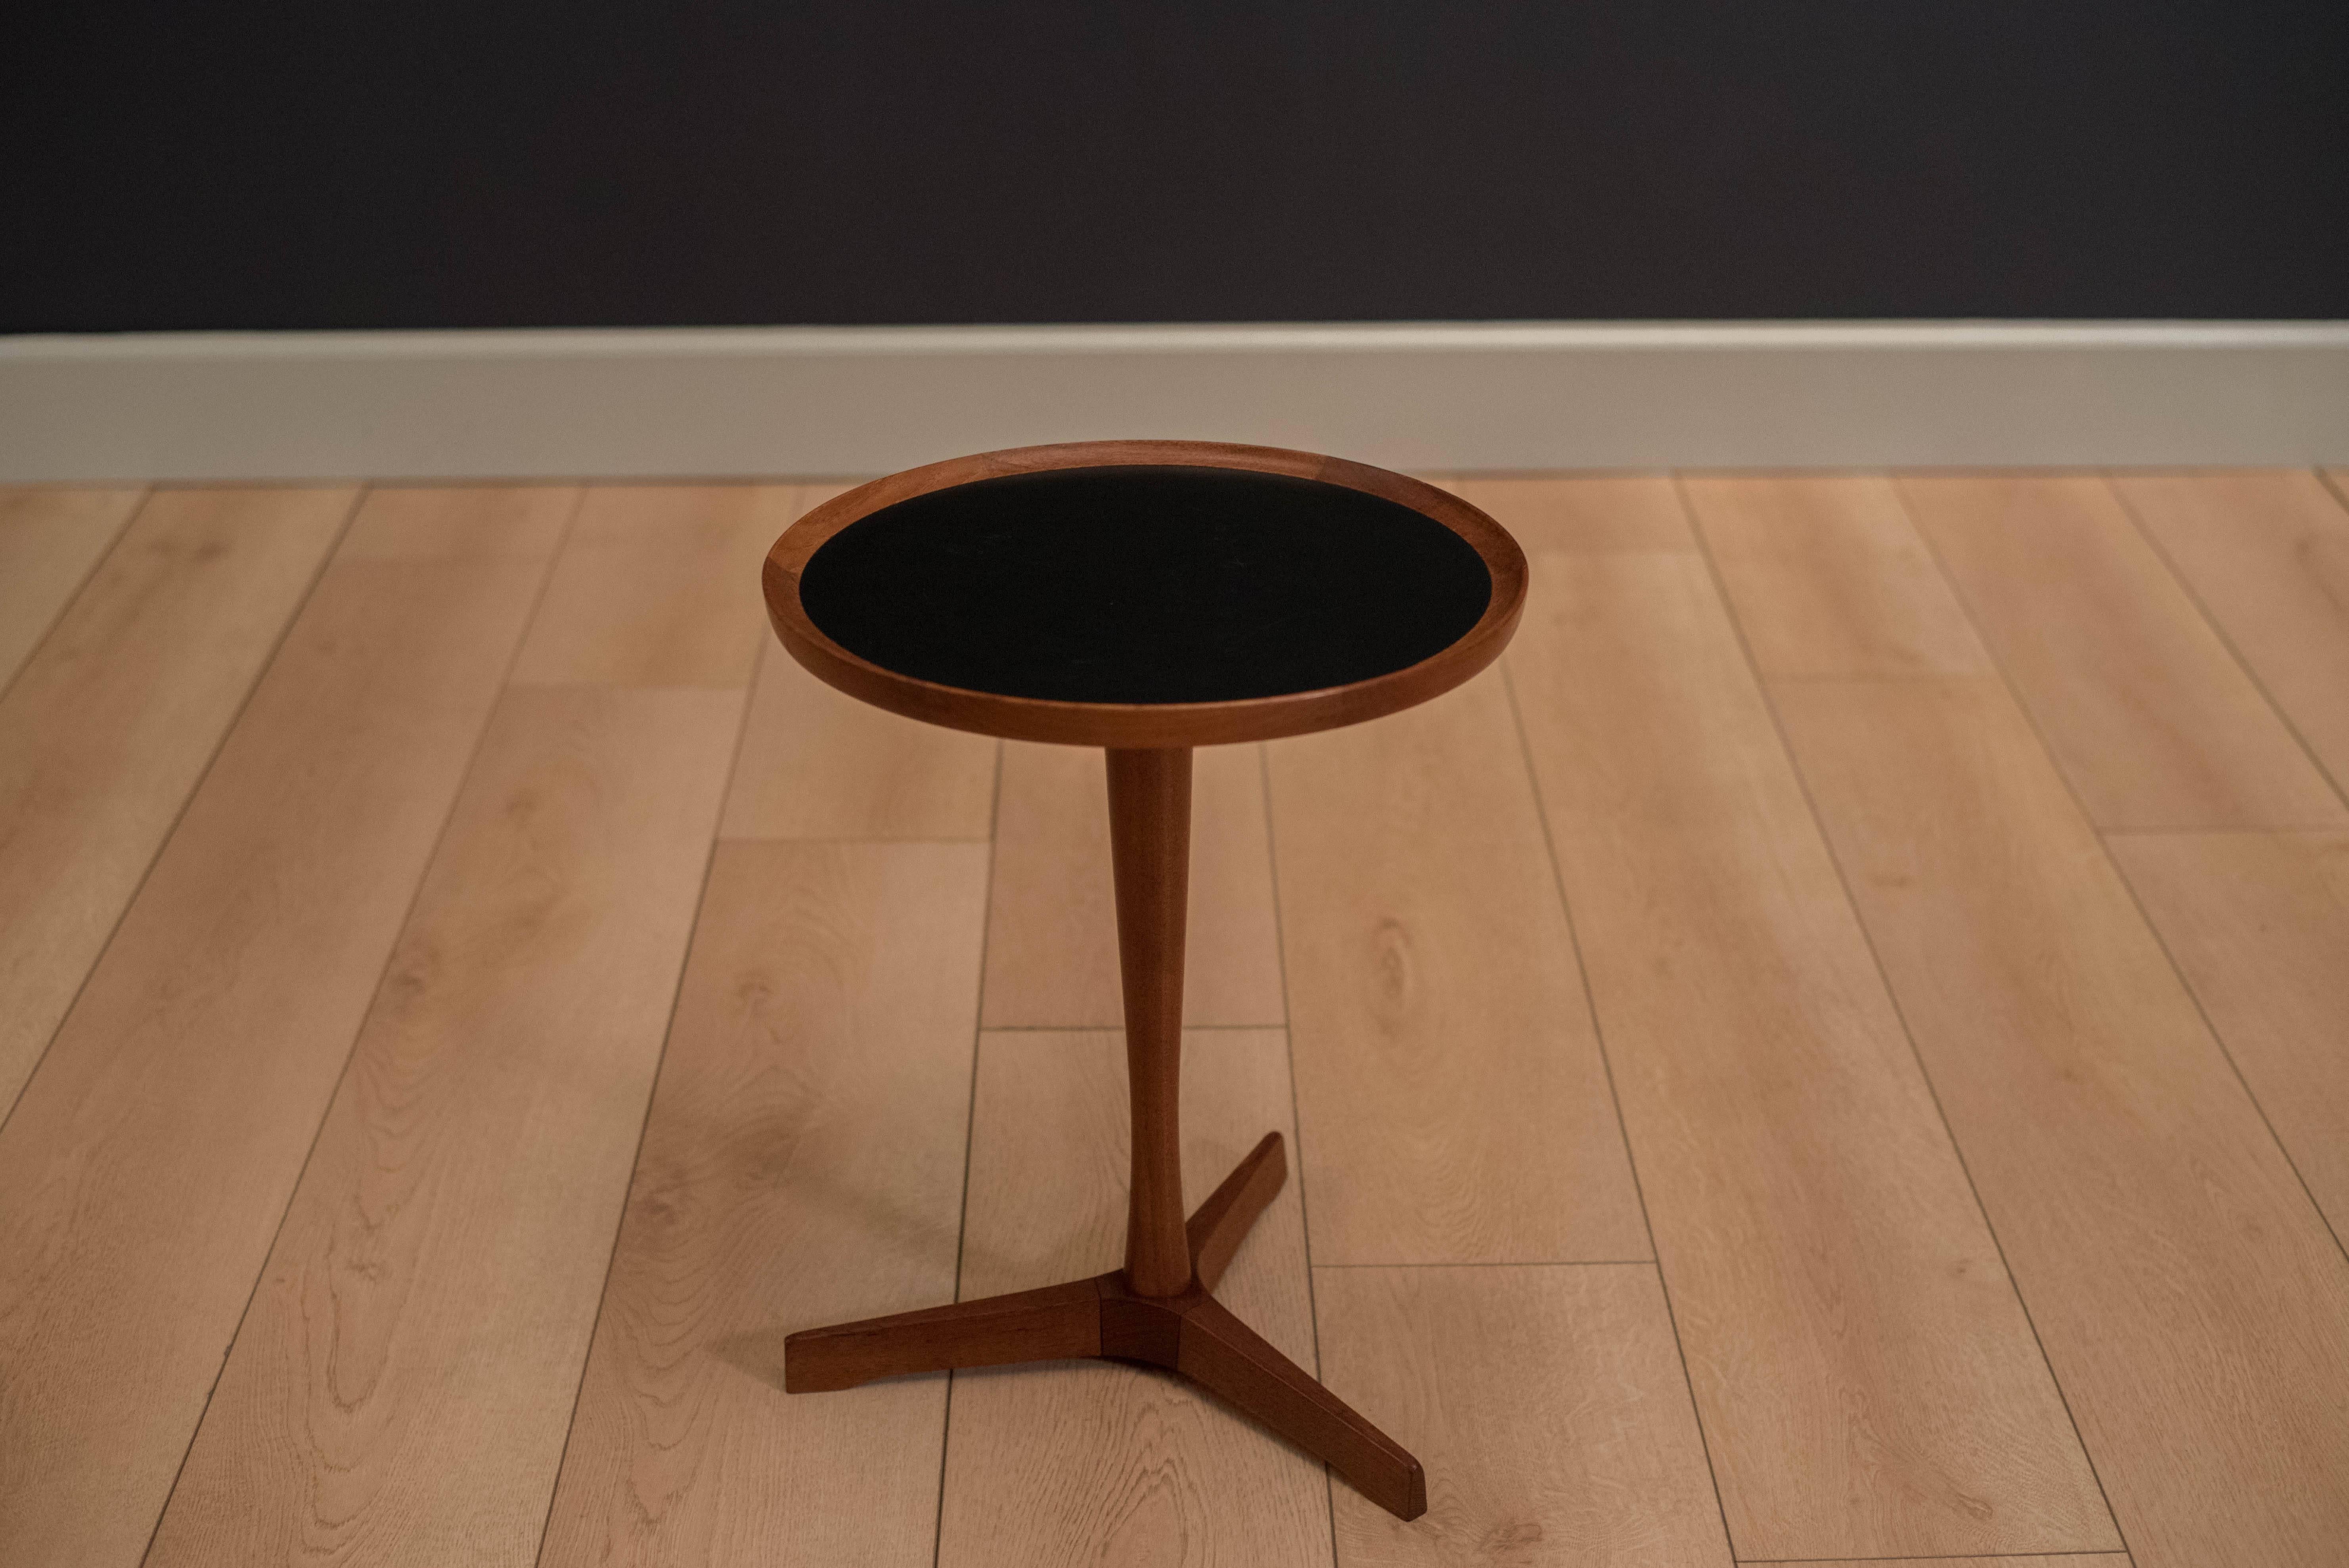 Mid-Century Modern pedestal side table designed by Hans C. Andersen for Artex. This piece has a black laminate inlaid top and a solid teak base. 

